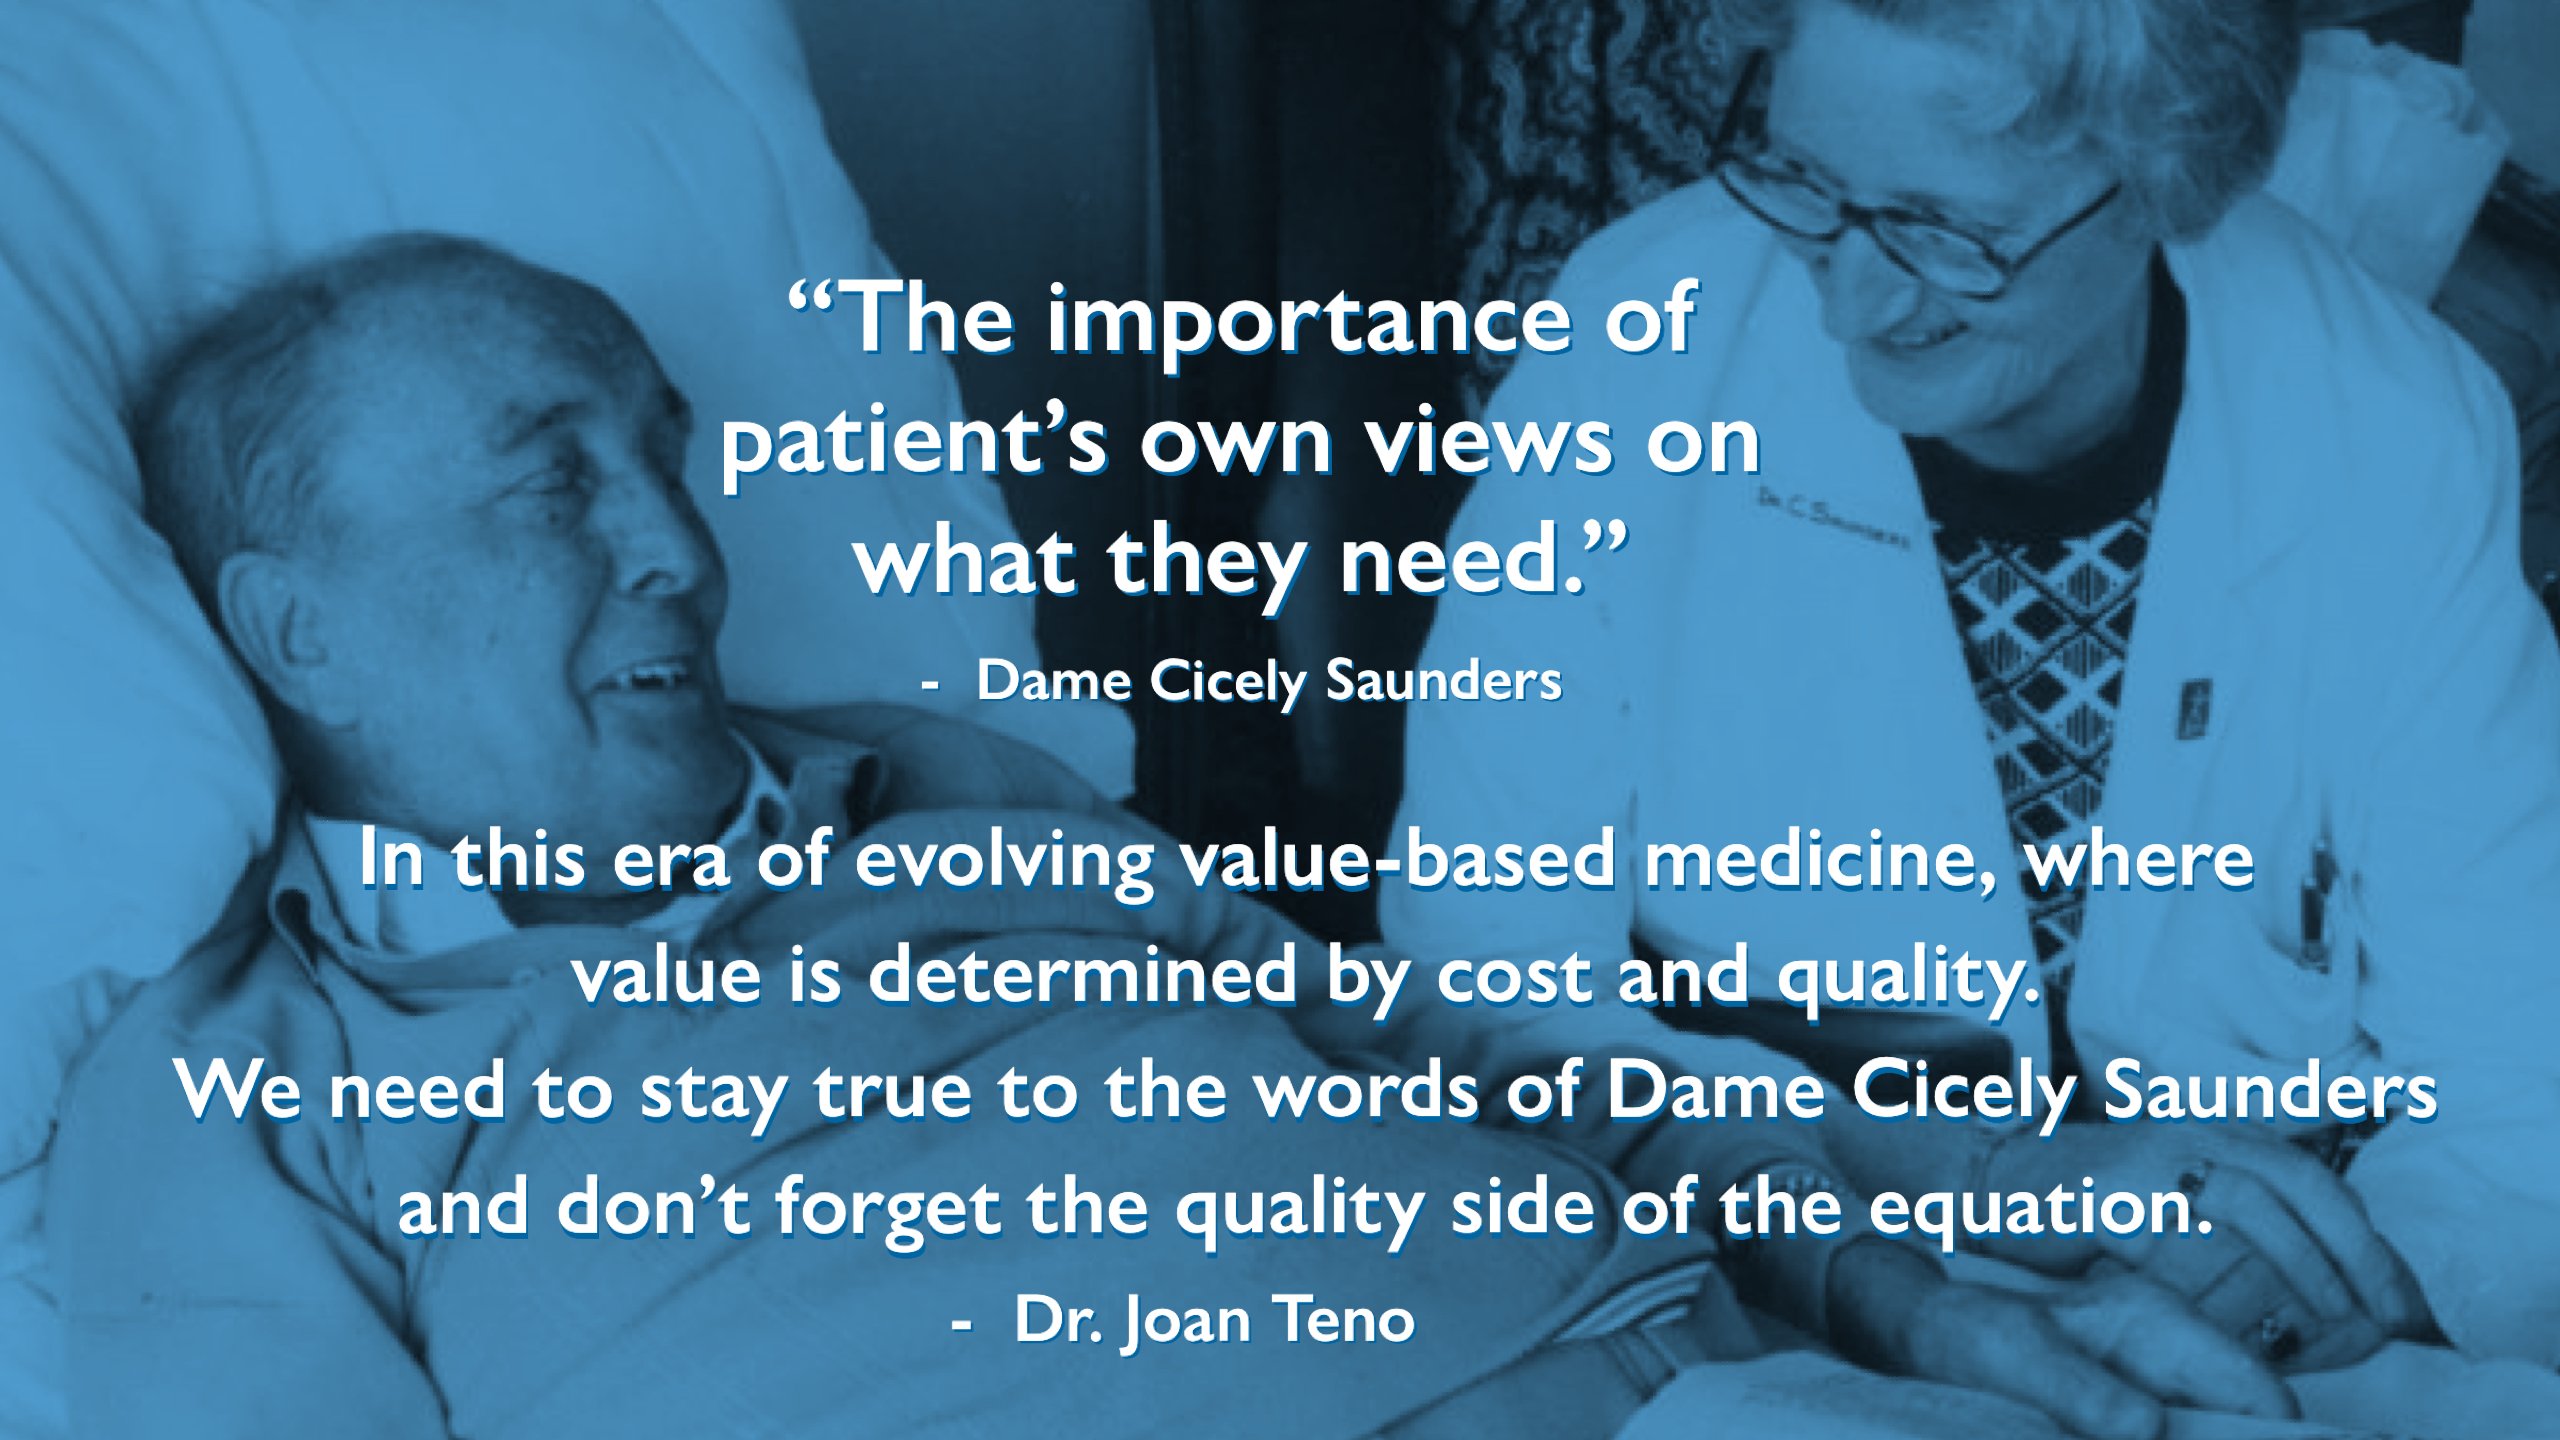 Quote by Dr. Joan Teno and Dame Cicely Saunders